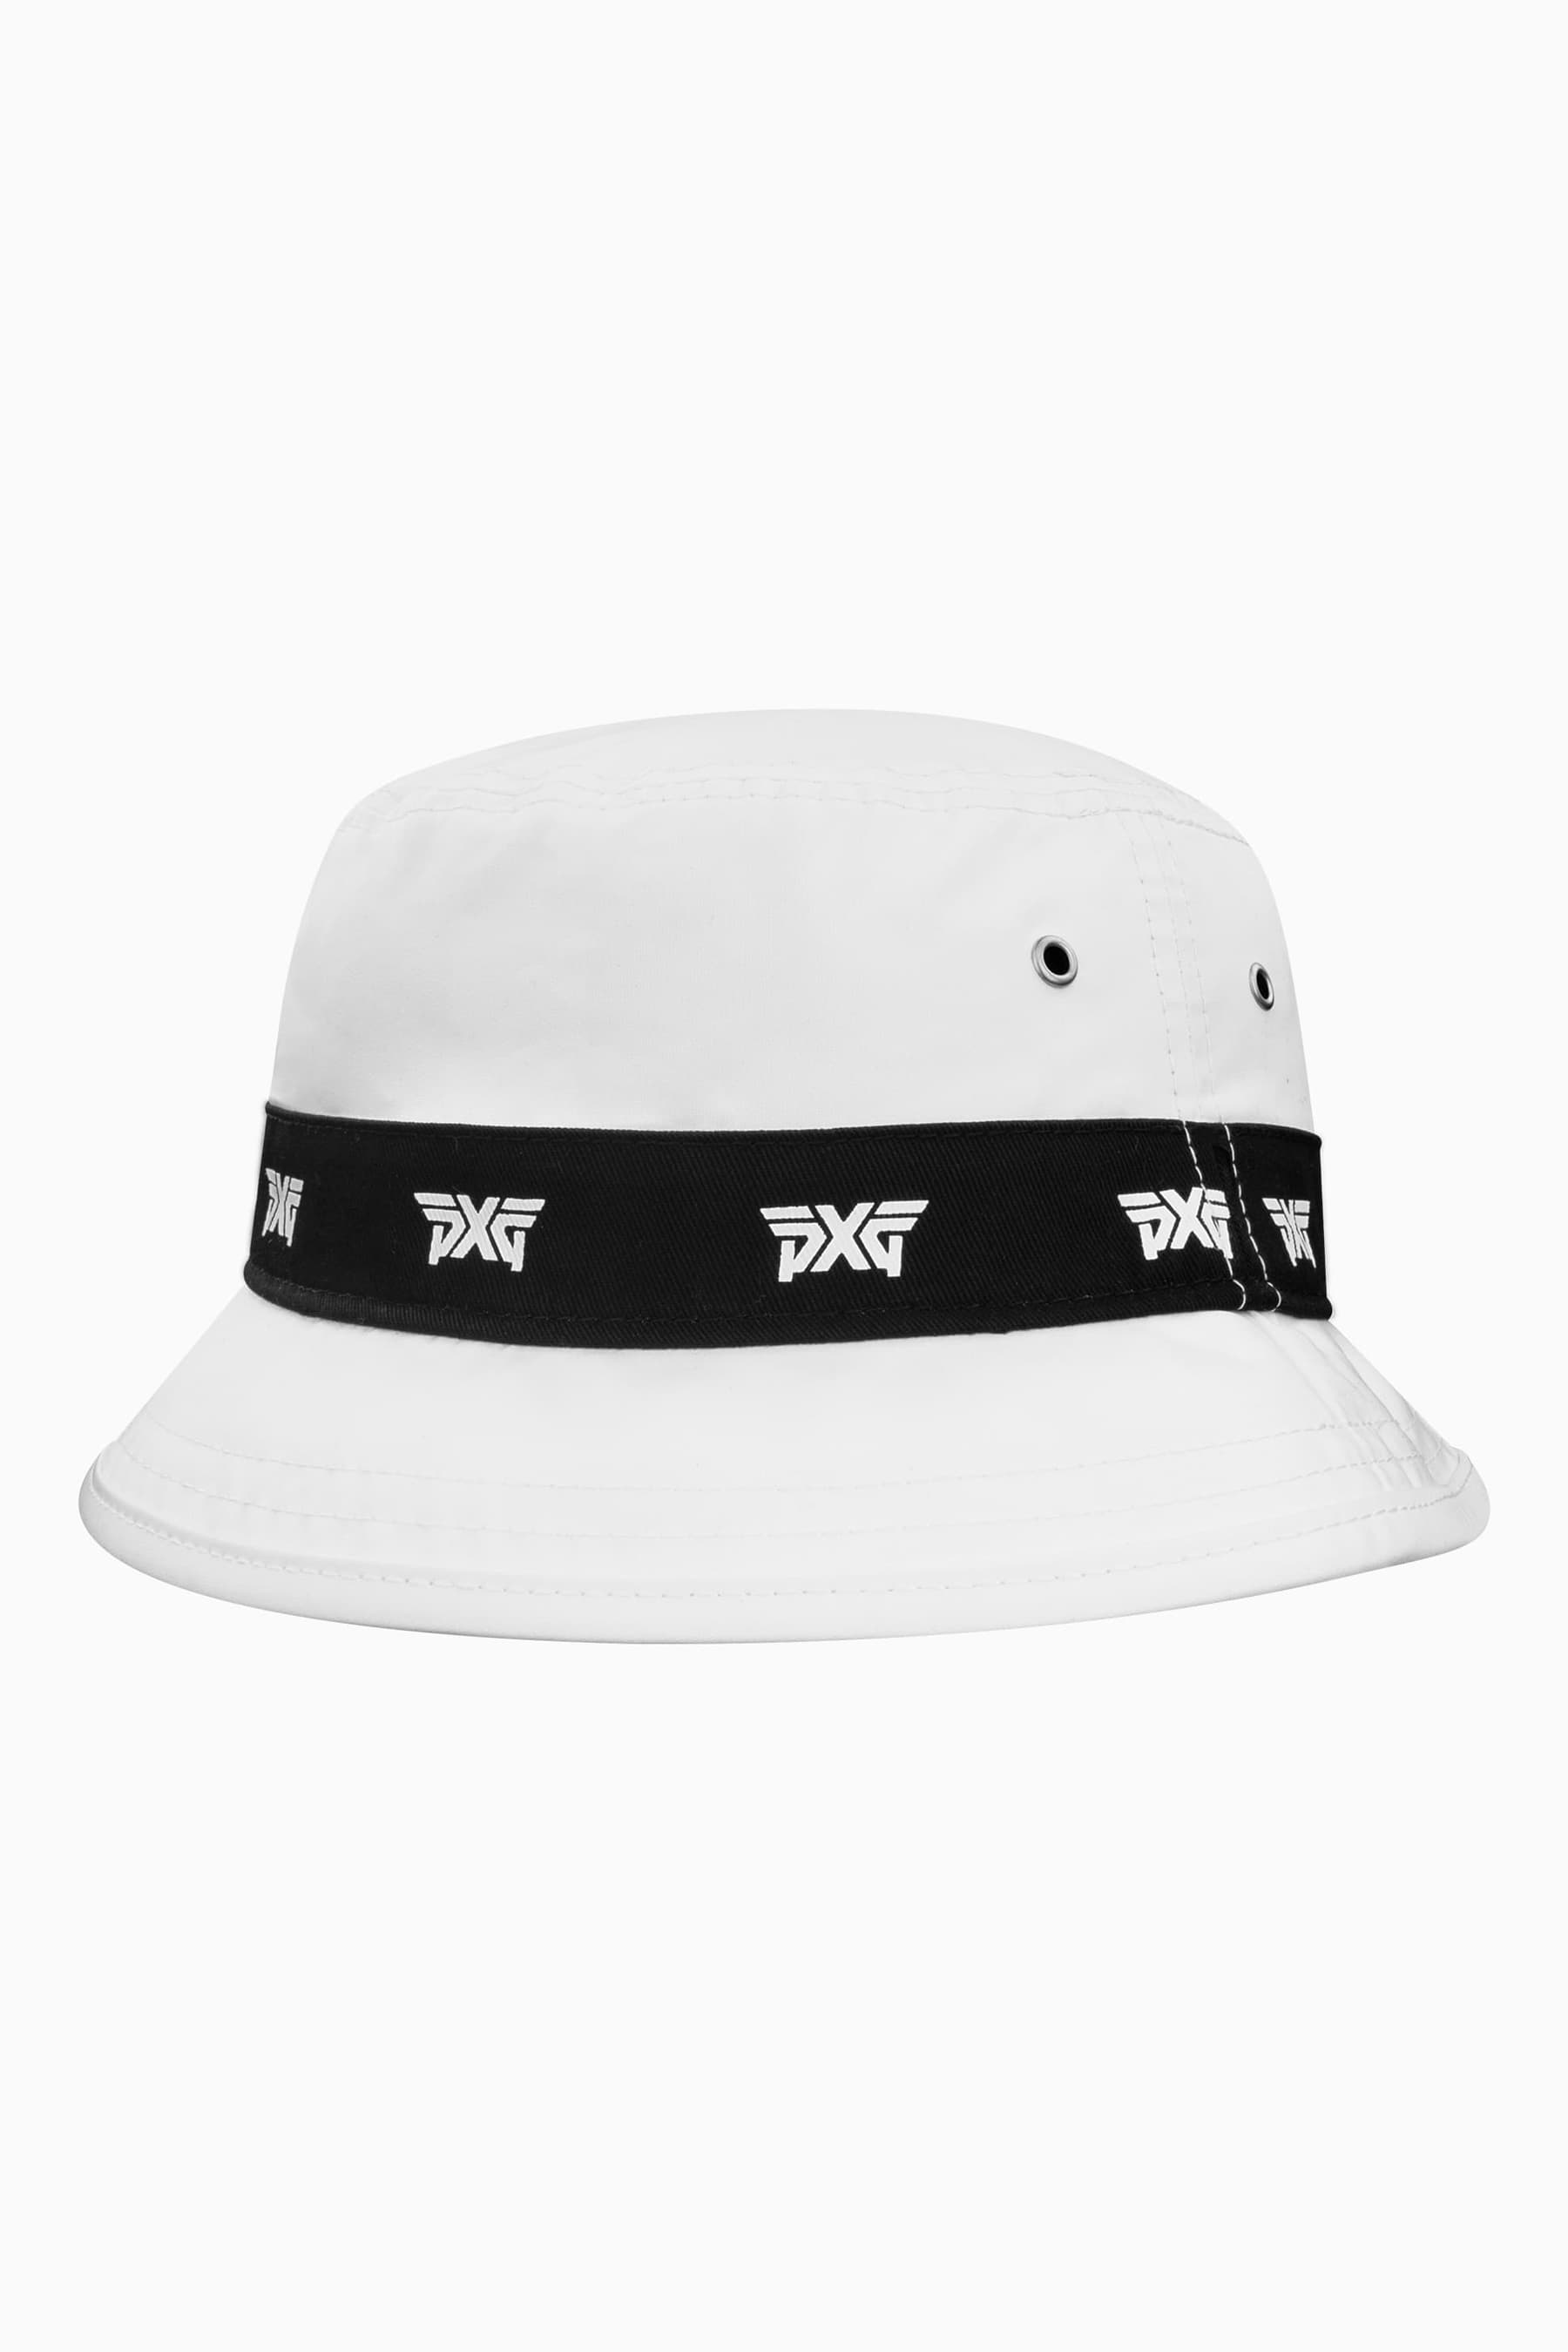 Logo Repeat Bucket Hat and Accessories Shop Golf Golf Quality | PXG the Clubs Highest Apparel, Gear, at